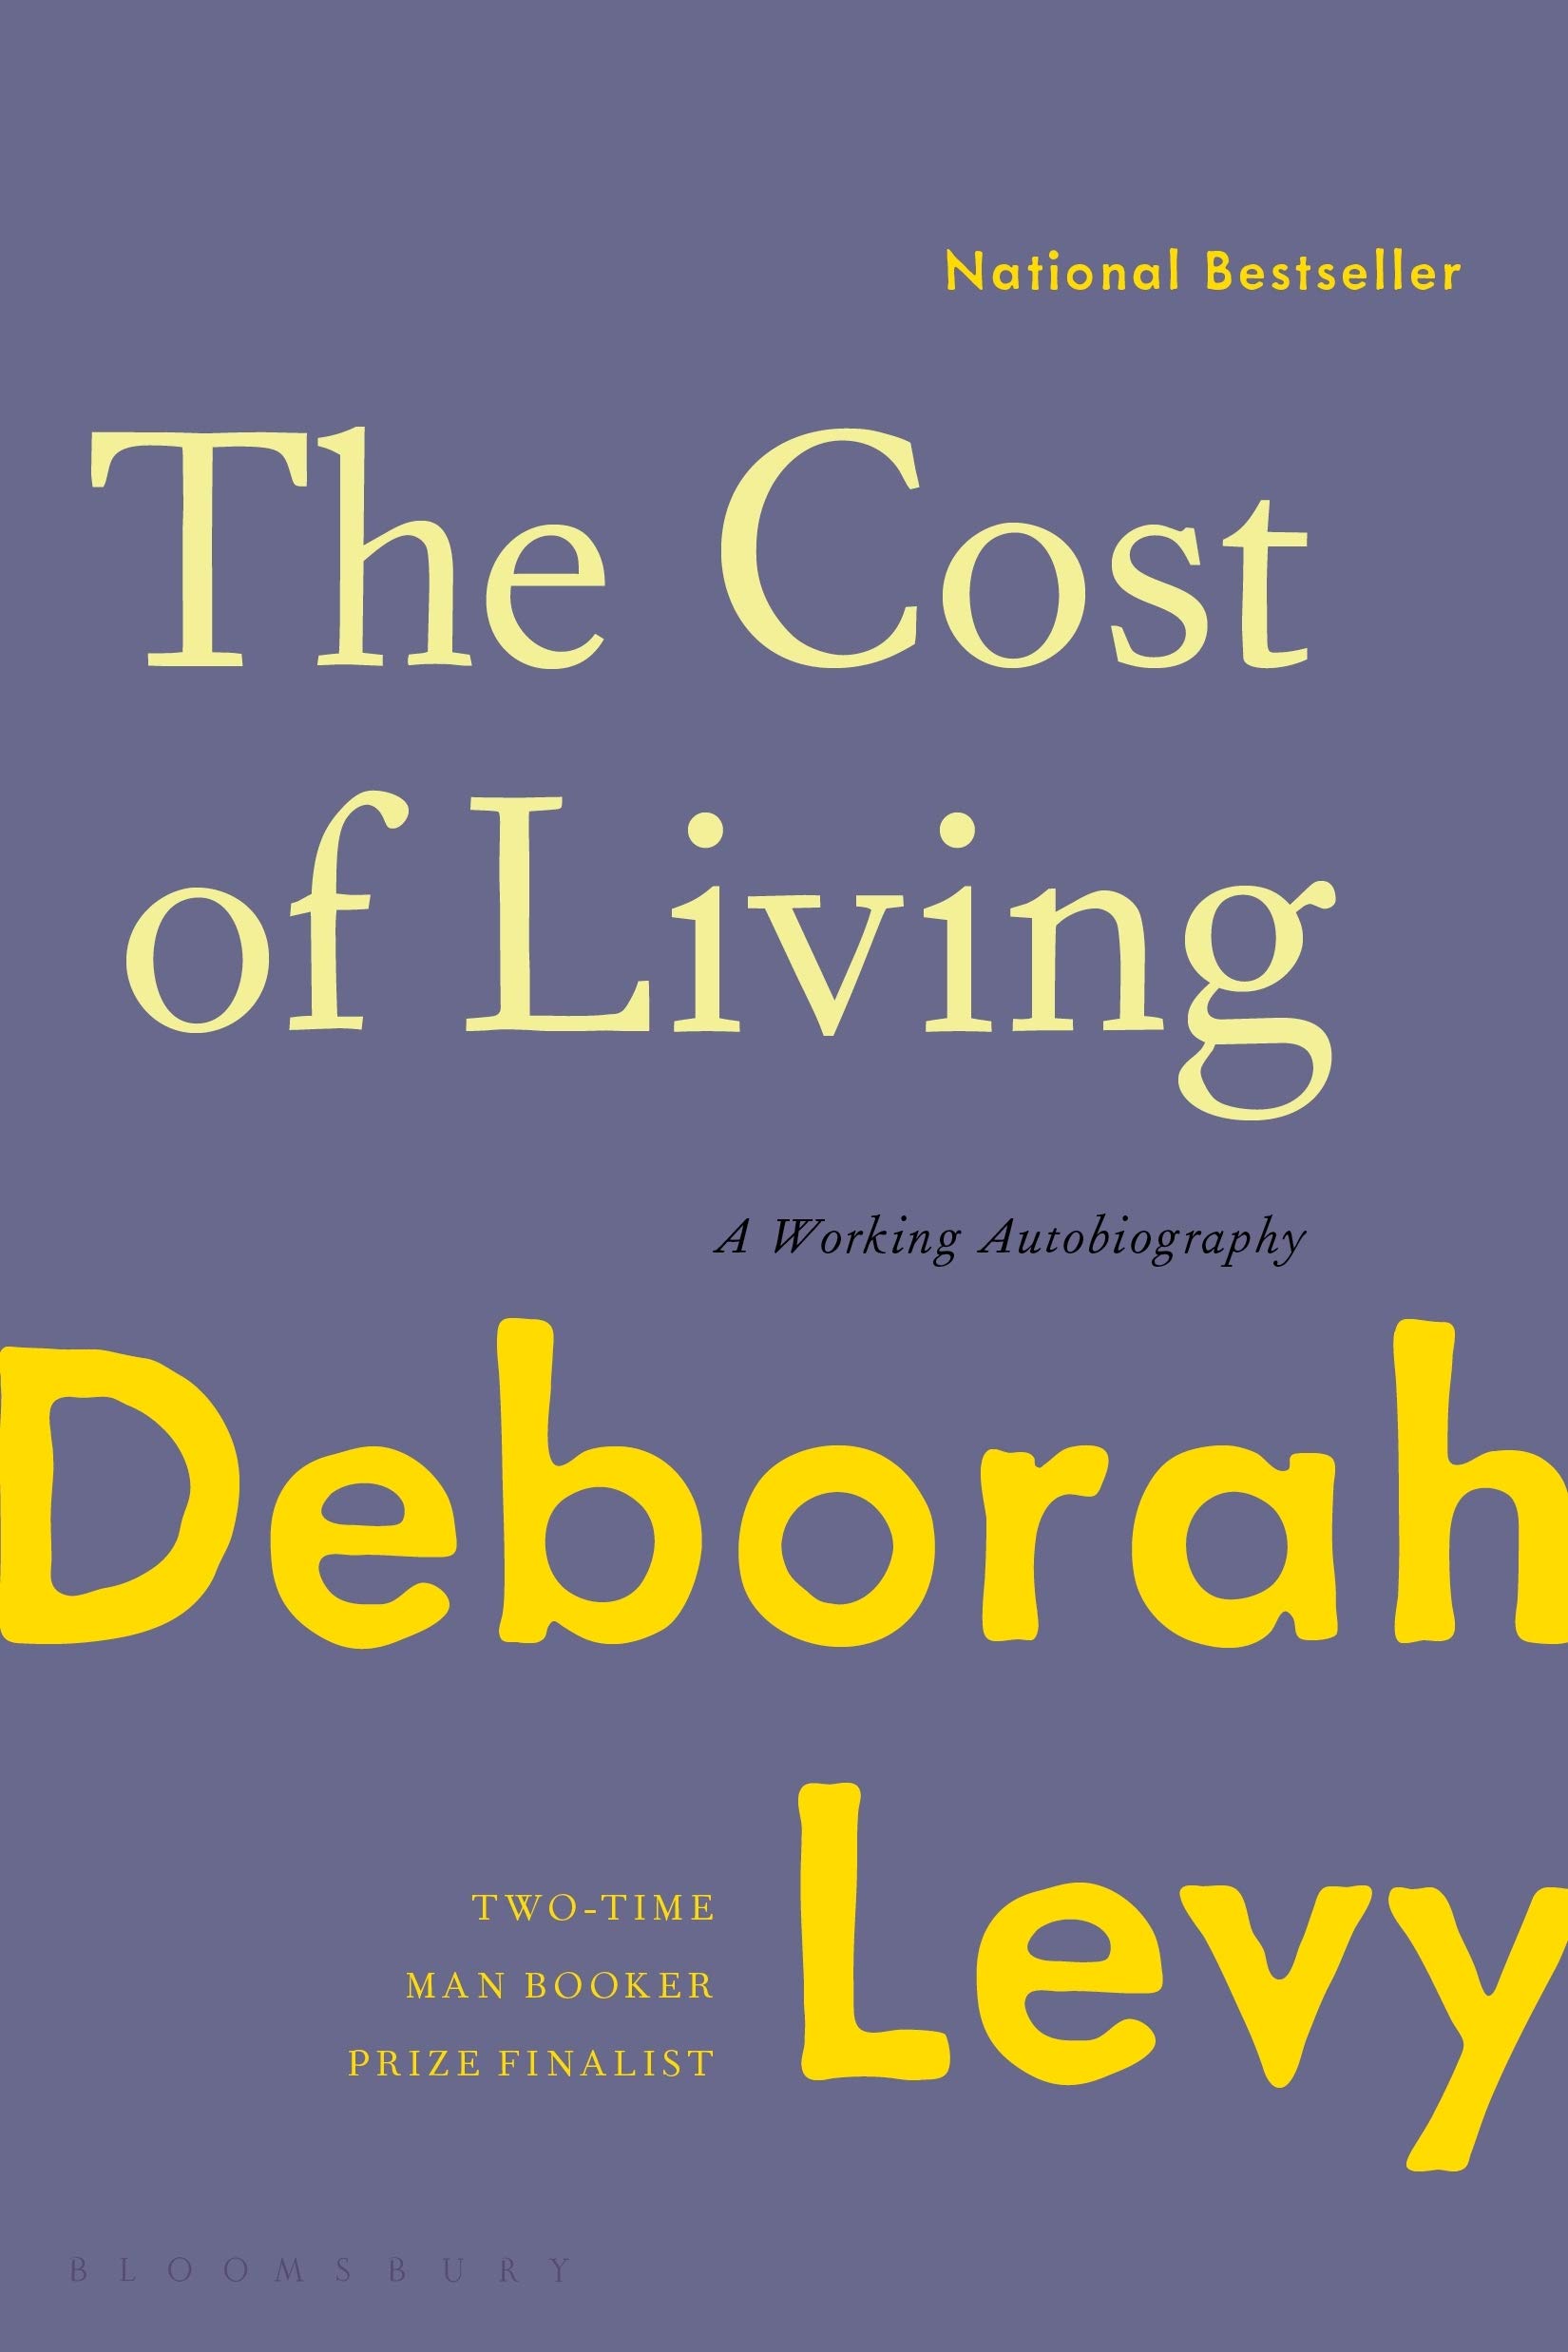 Image for "The Cost of Living"